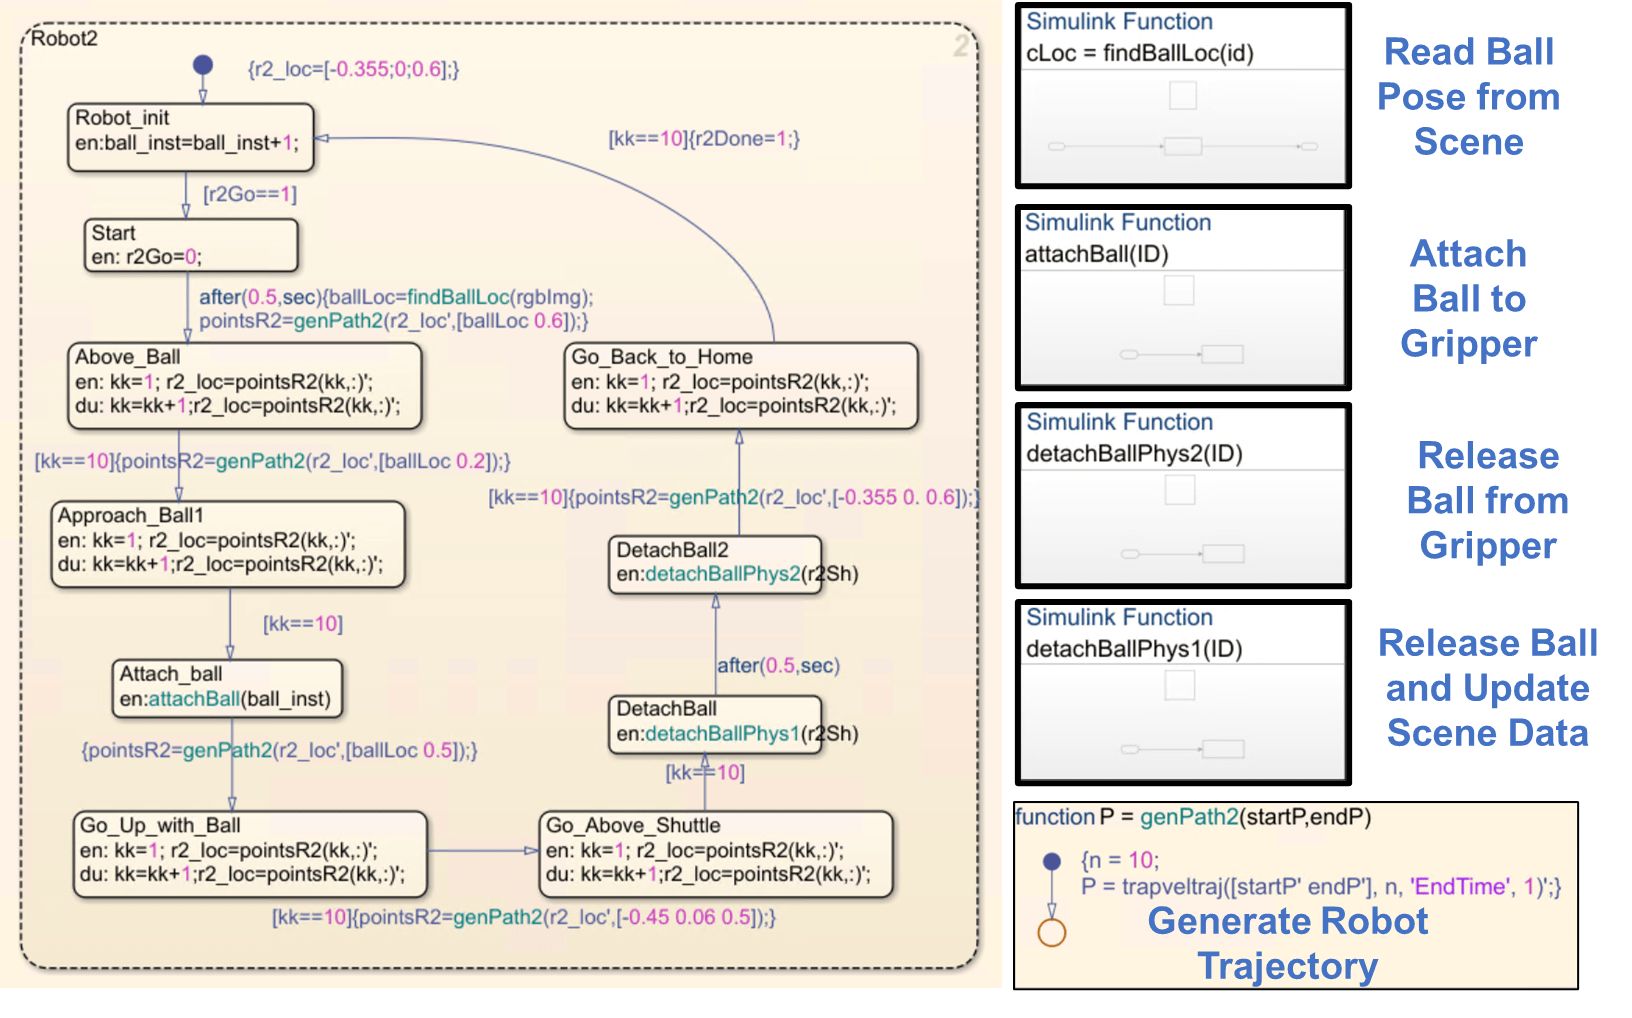 Robot 2 stateflow chart interfaces with multiple functions and subsystems.